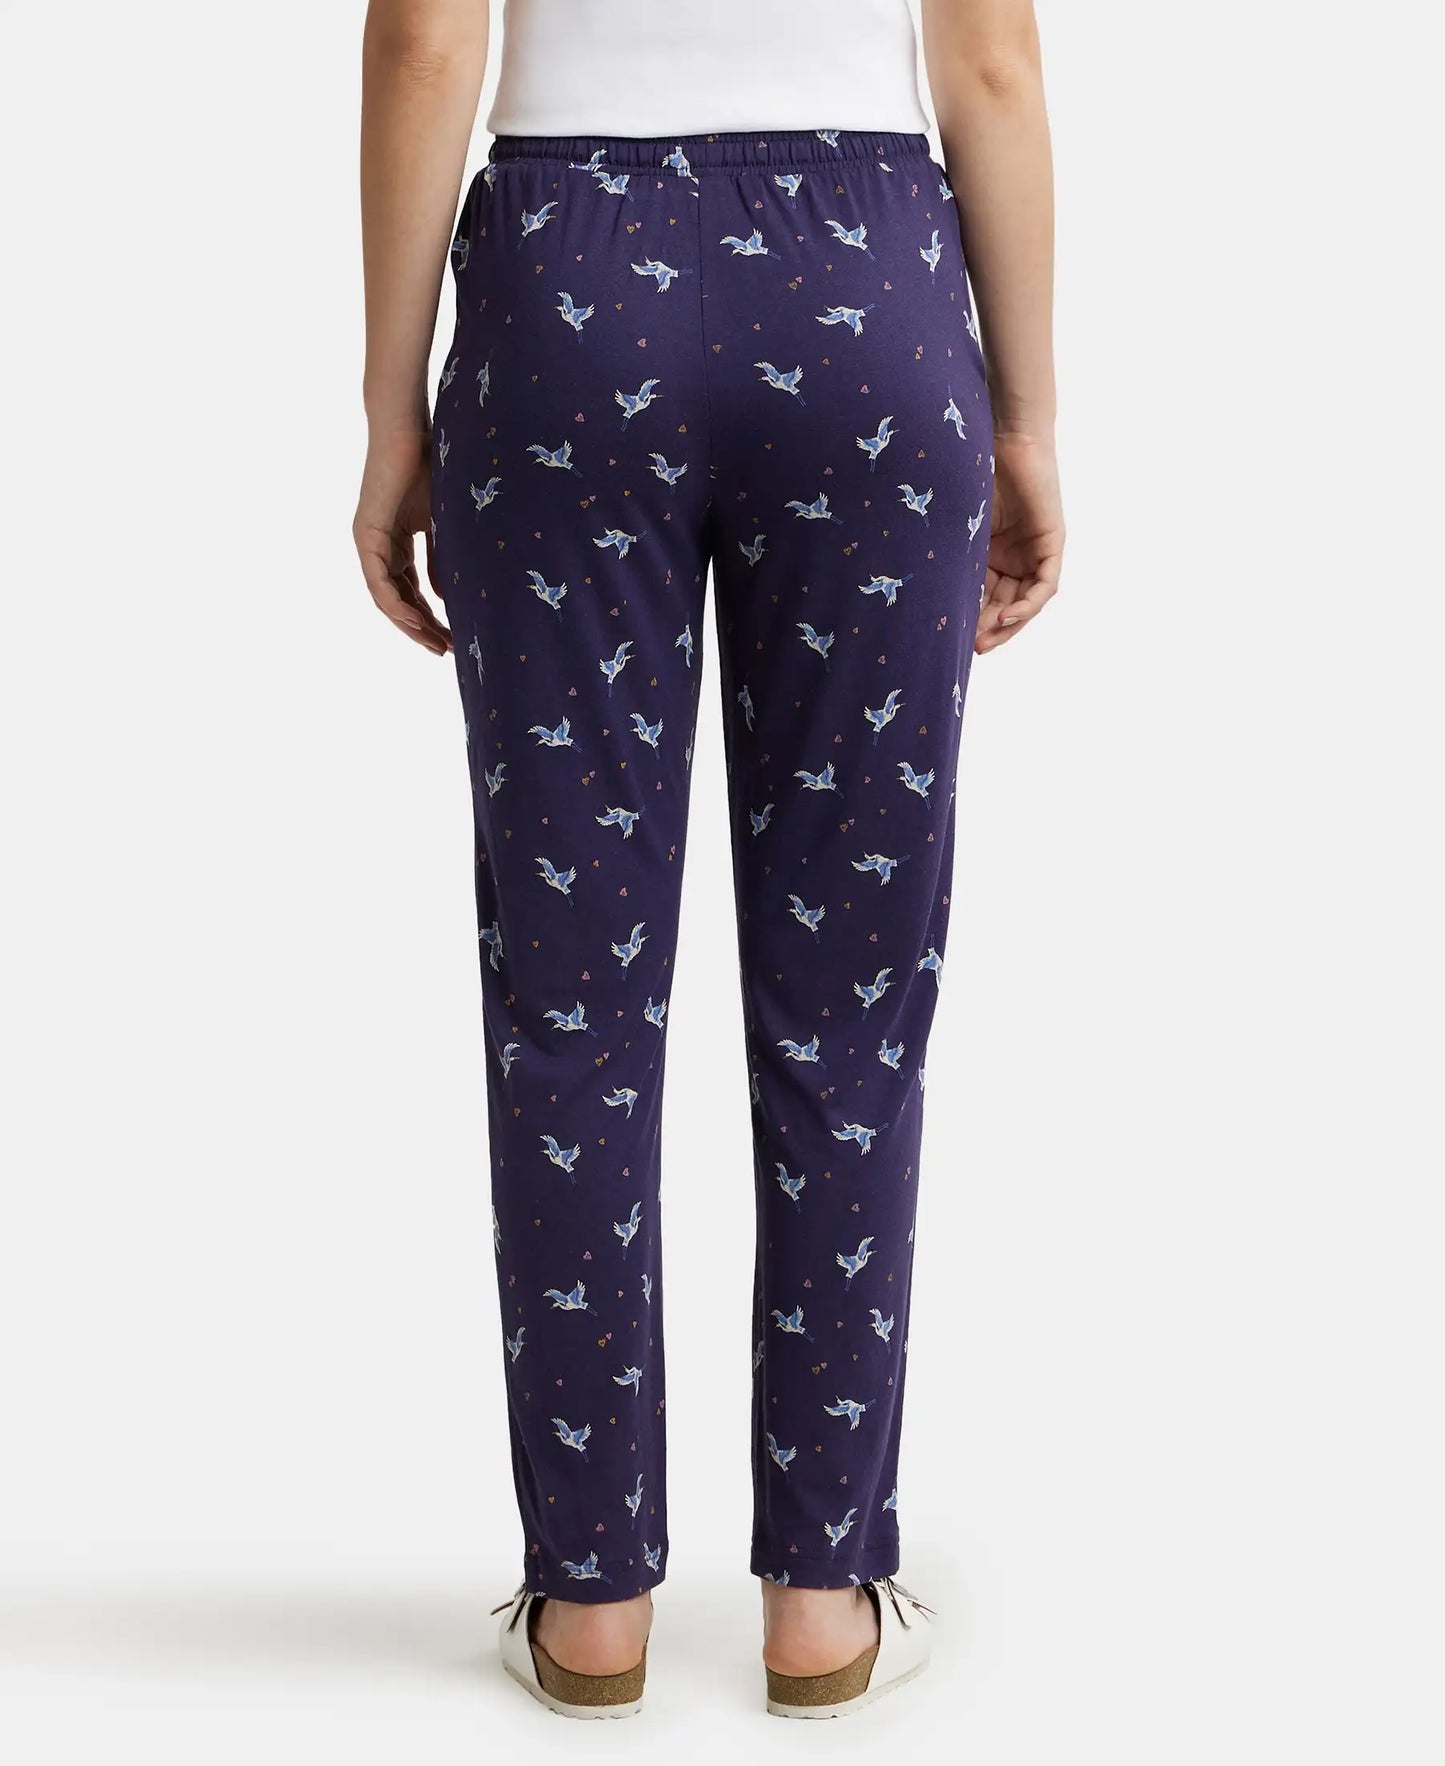 Micro Modal Cotton Relaxed Fit Printed Pyjama with Side Pockets - Classic Navy Assorted Prints-3